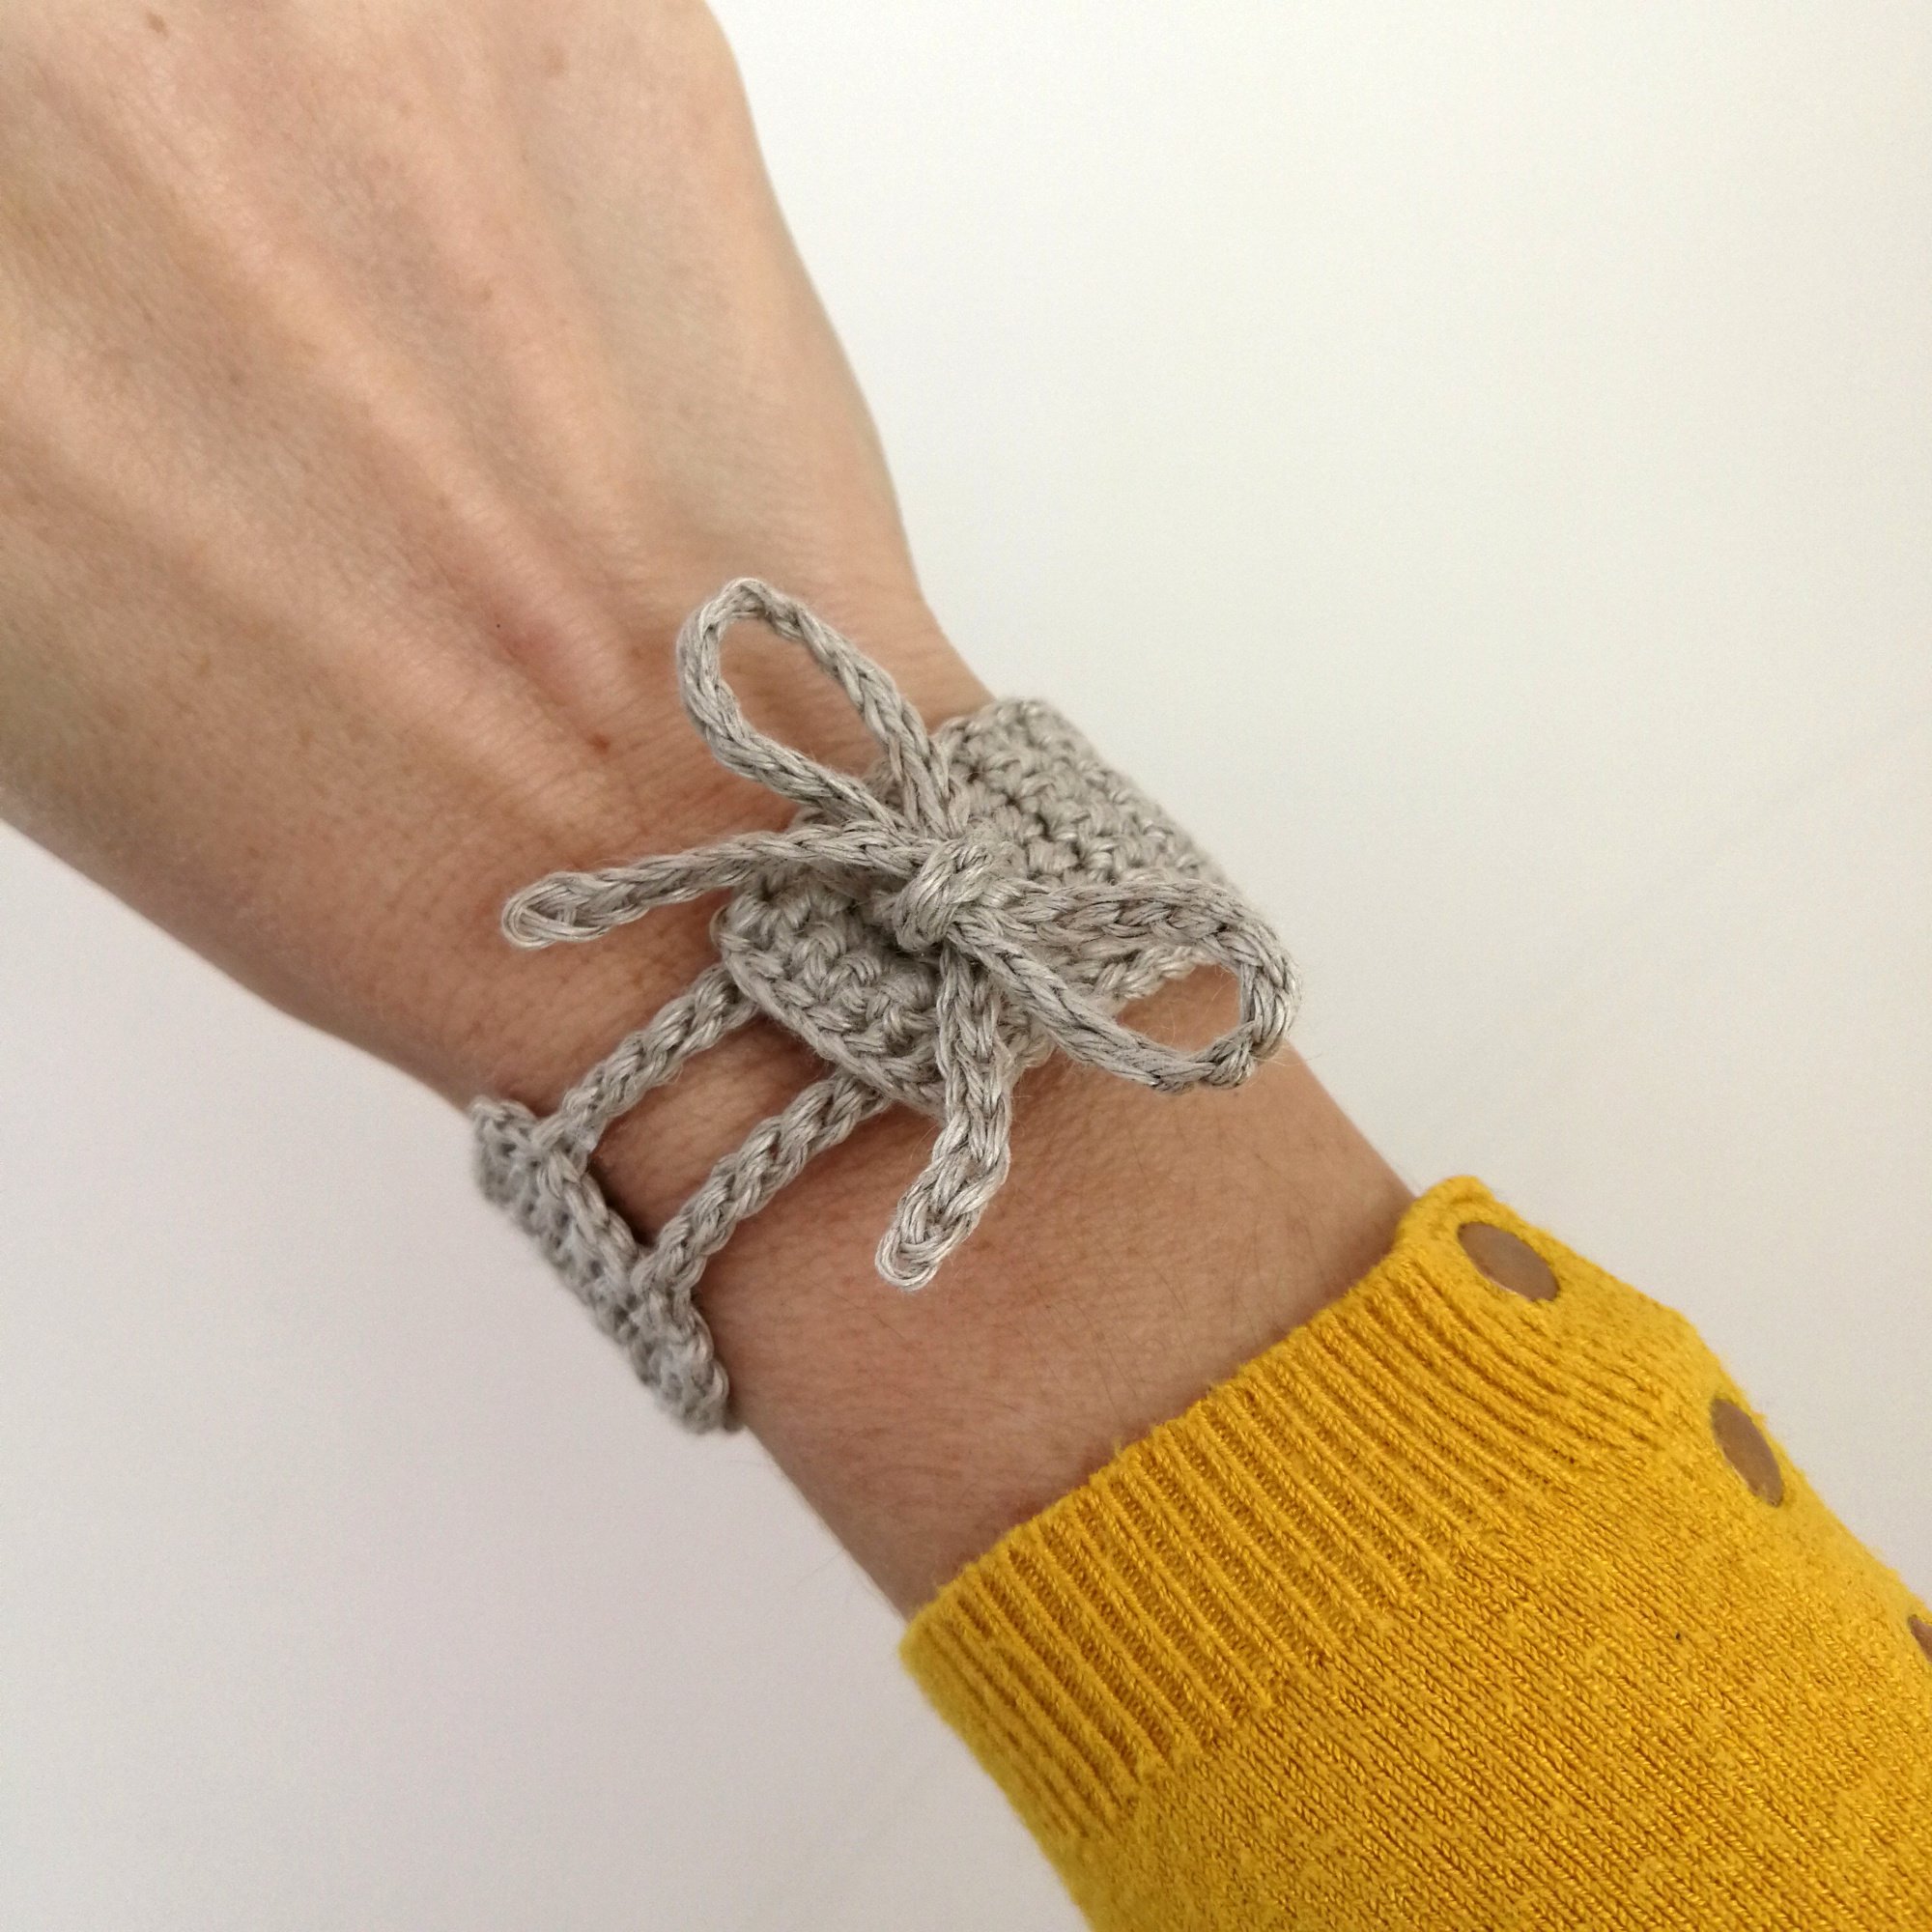 A close up photo of a right forearm wearing the linen bracelet which is light grey in colour and has a bow on the top. above the wrist is a yellow jumper with silver buttons down one side.